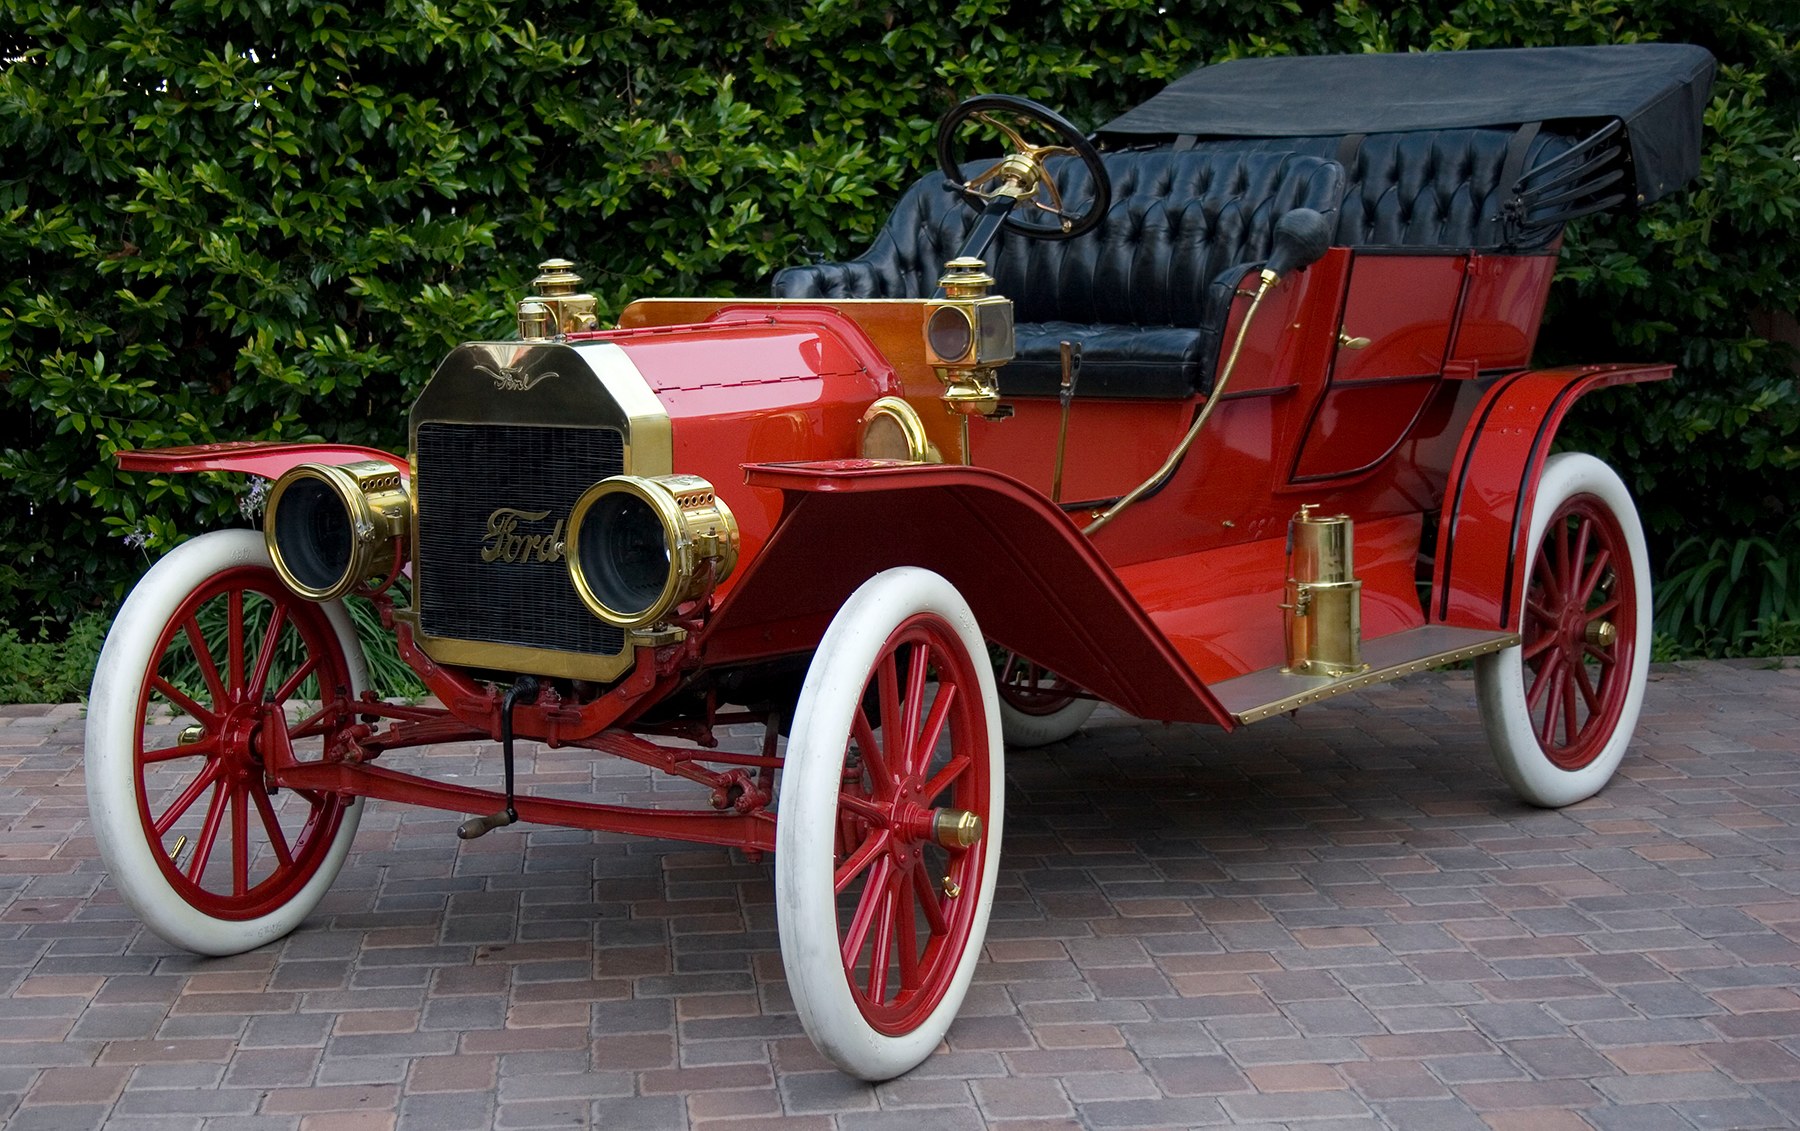 1909 Model T Ford Touring Car